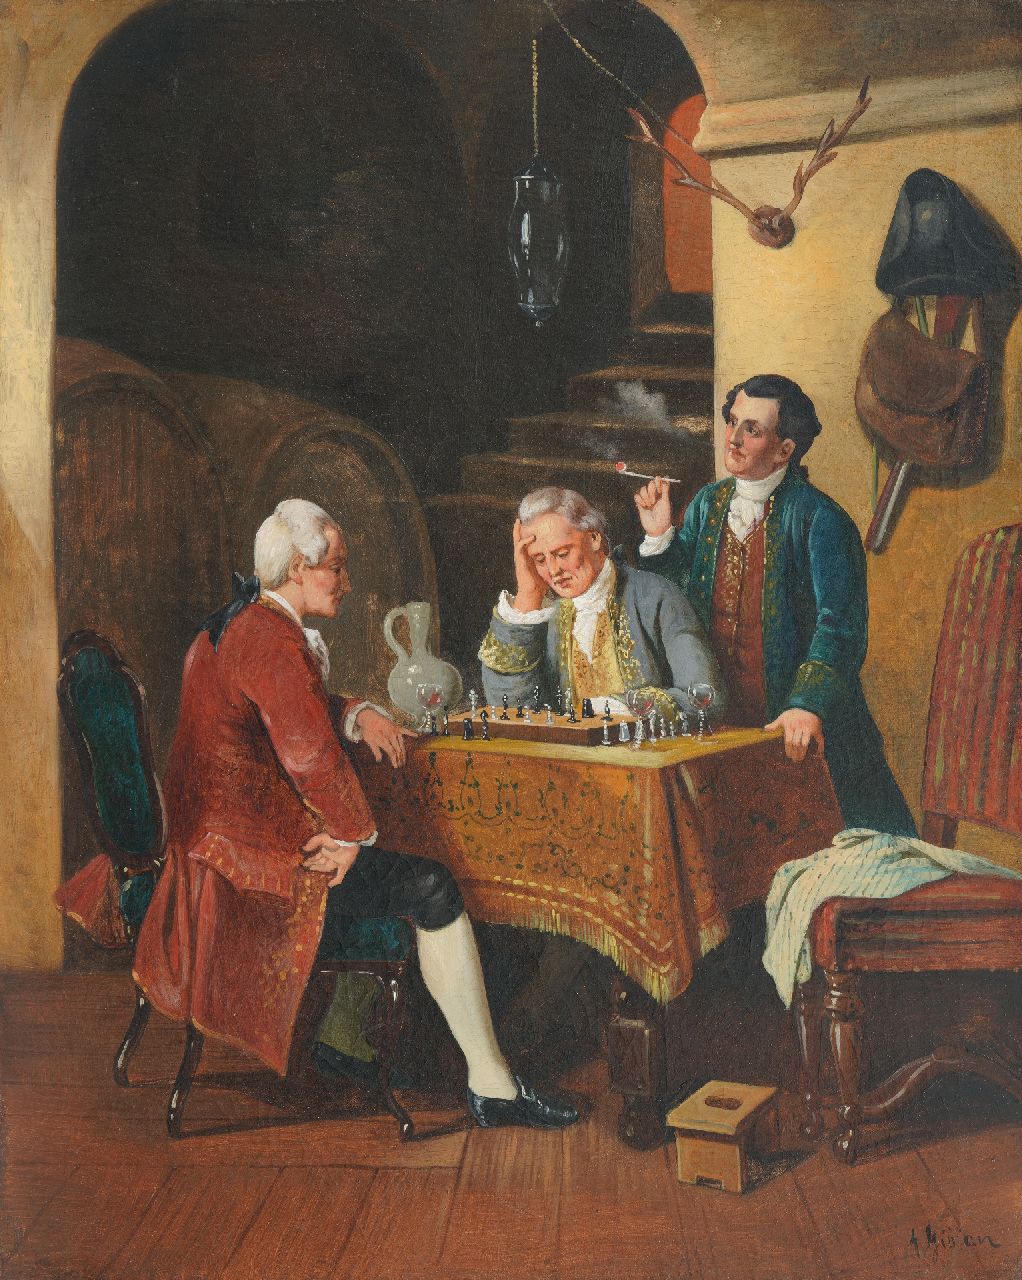 Engelse School, 19e eeuw   | Engelse School, 19e eeuw | Paintings offered for sale | Playing chess in the cellar, oil on canvas 69.0 x 55.8 cm, gesigneerd rechtsonder